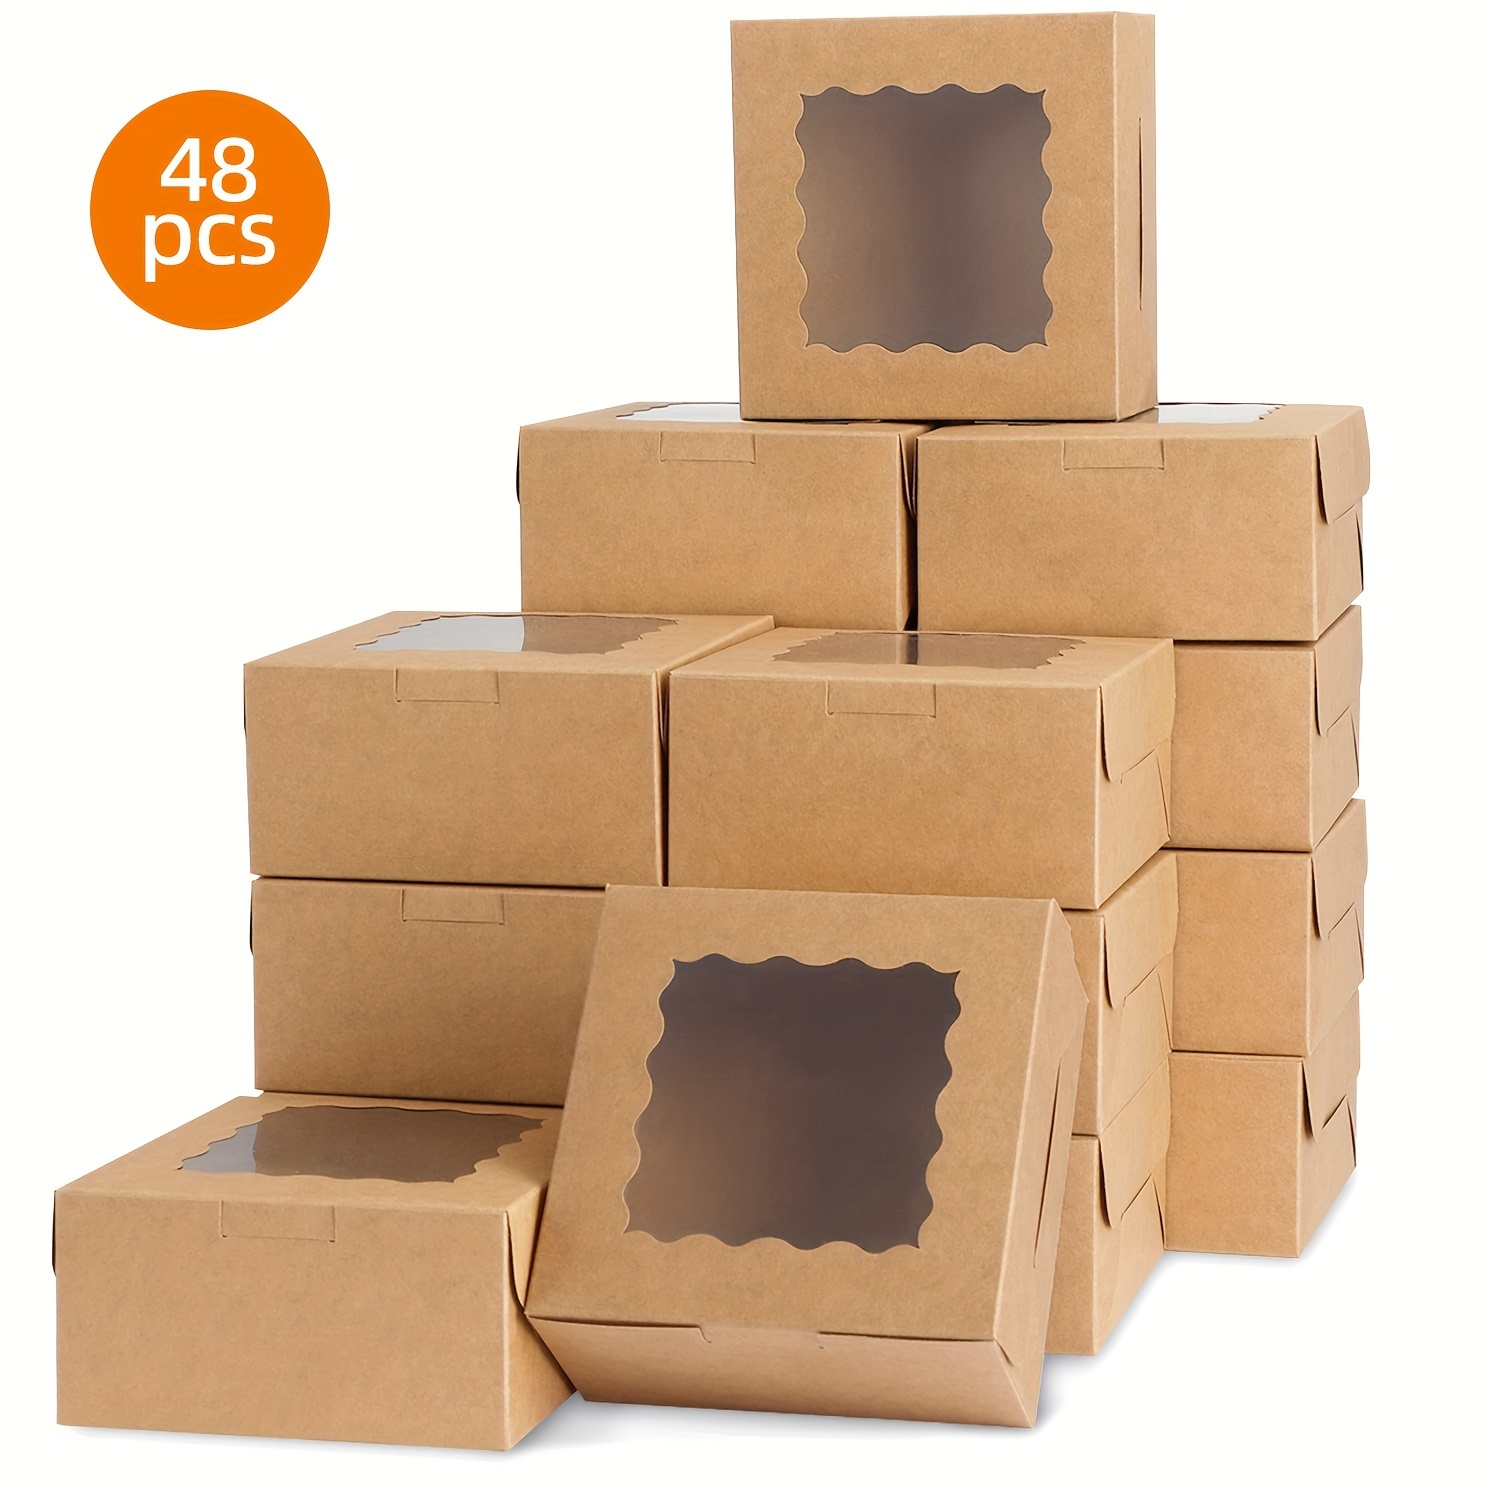 

48pcs Boxes, Kraft Paper Bakery Boxes With Windows For Treat, , Pastry, Cupcakes, Pie, Donuts, Used In Bride Shower, Wedding, Birthday Party, Christmas, 6x6x3 In